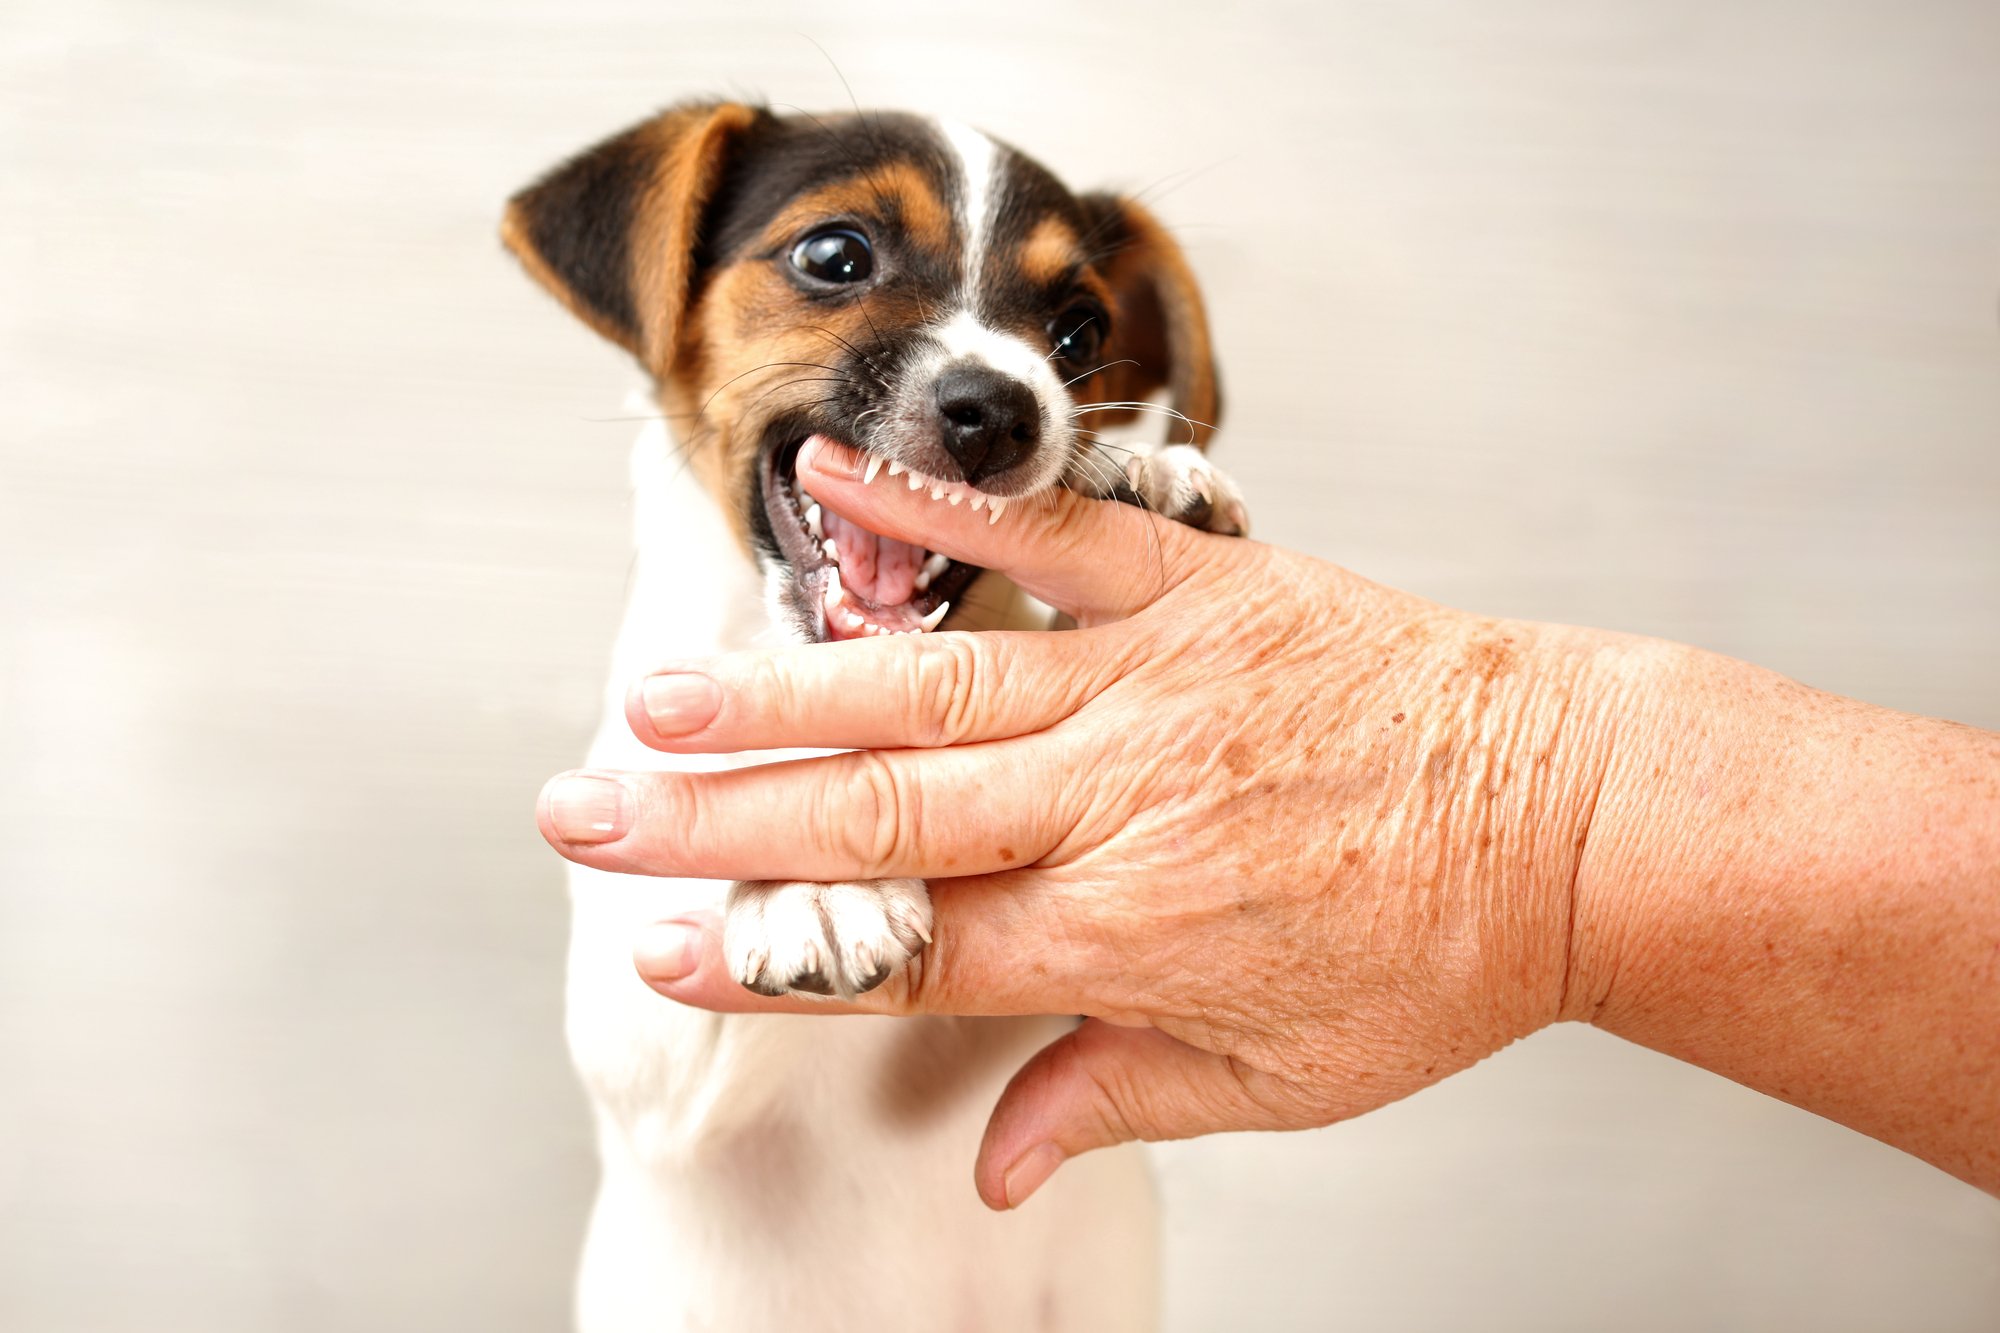 how to control puppy biting